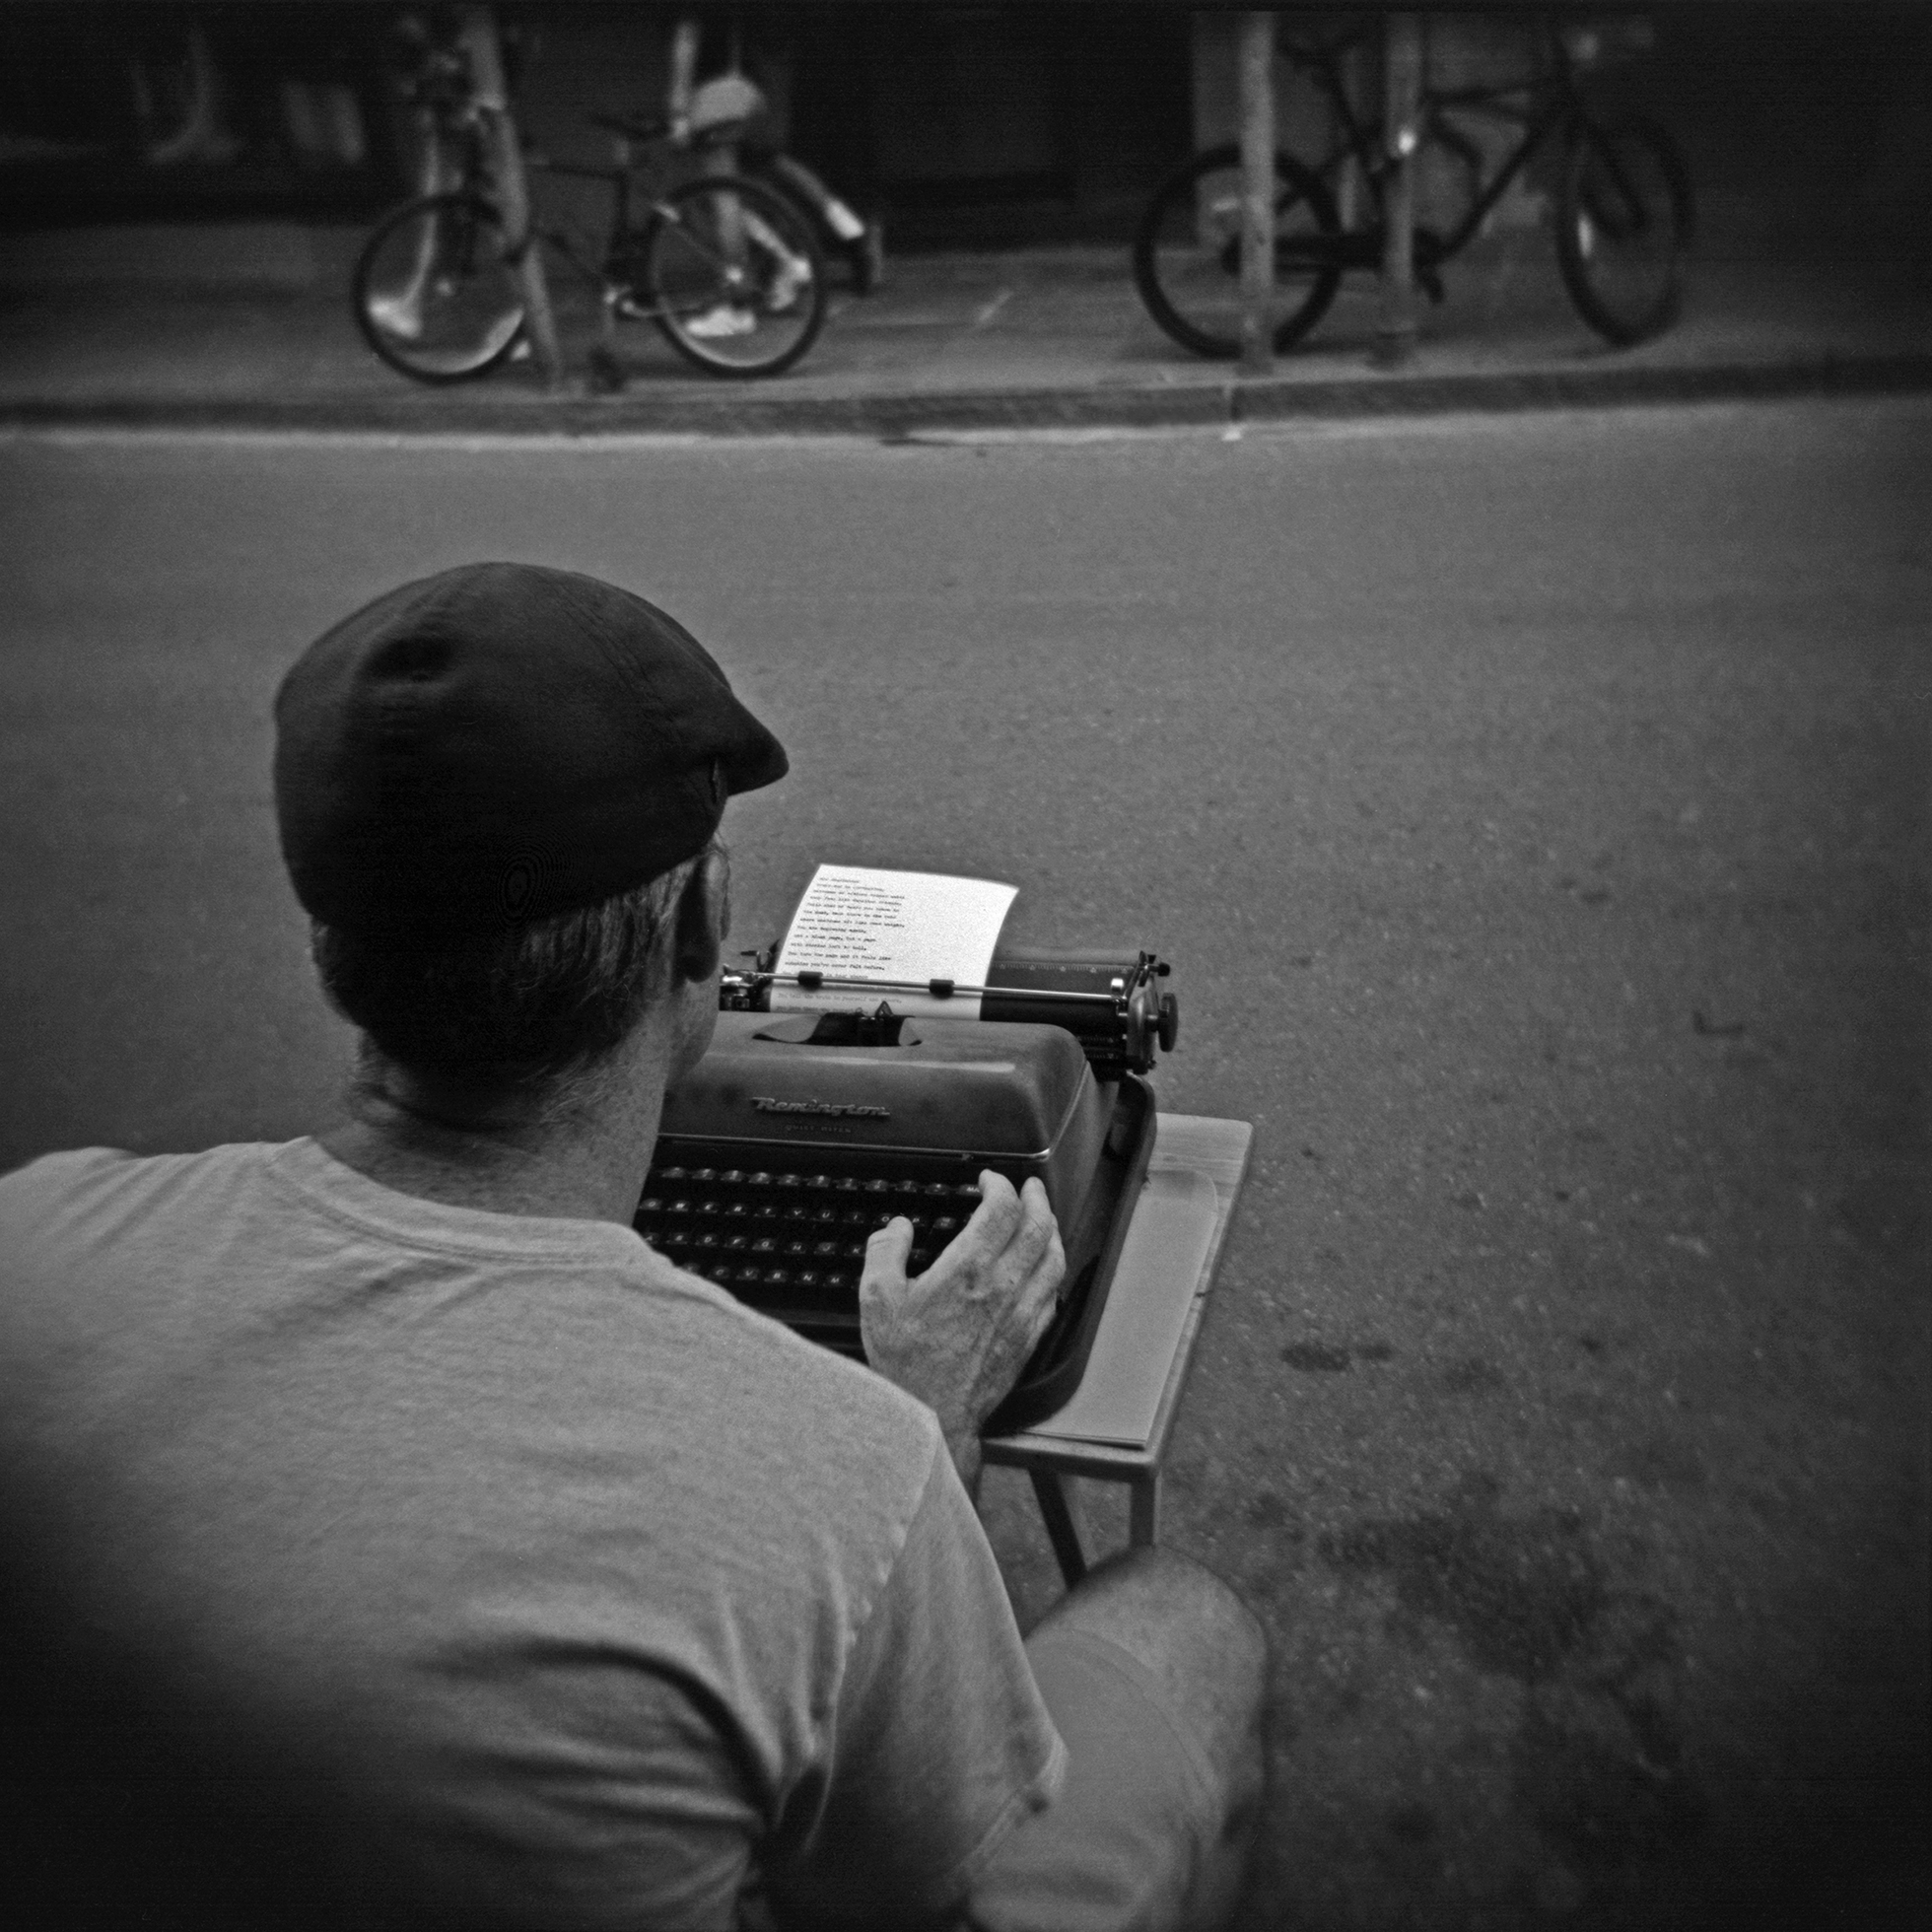 A man in a newsboy cap, T-shirt, and shorts sits at the side of a street typing on an old-fashioned typewriter on a small table. He is seen from the back. Across the street two bicycles are parked and people walk by on the sidewalk.